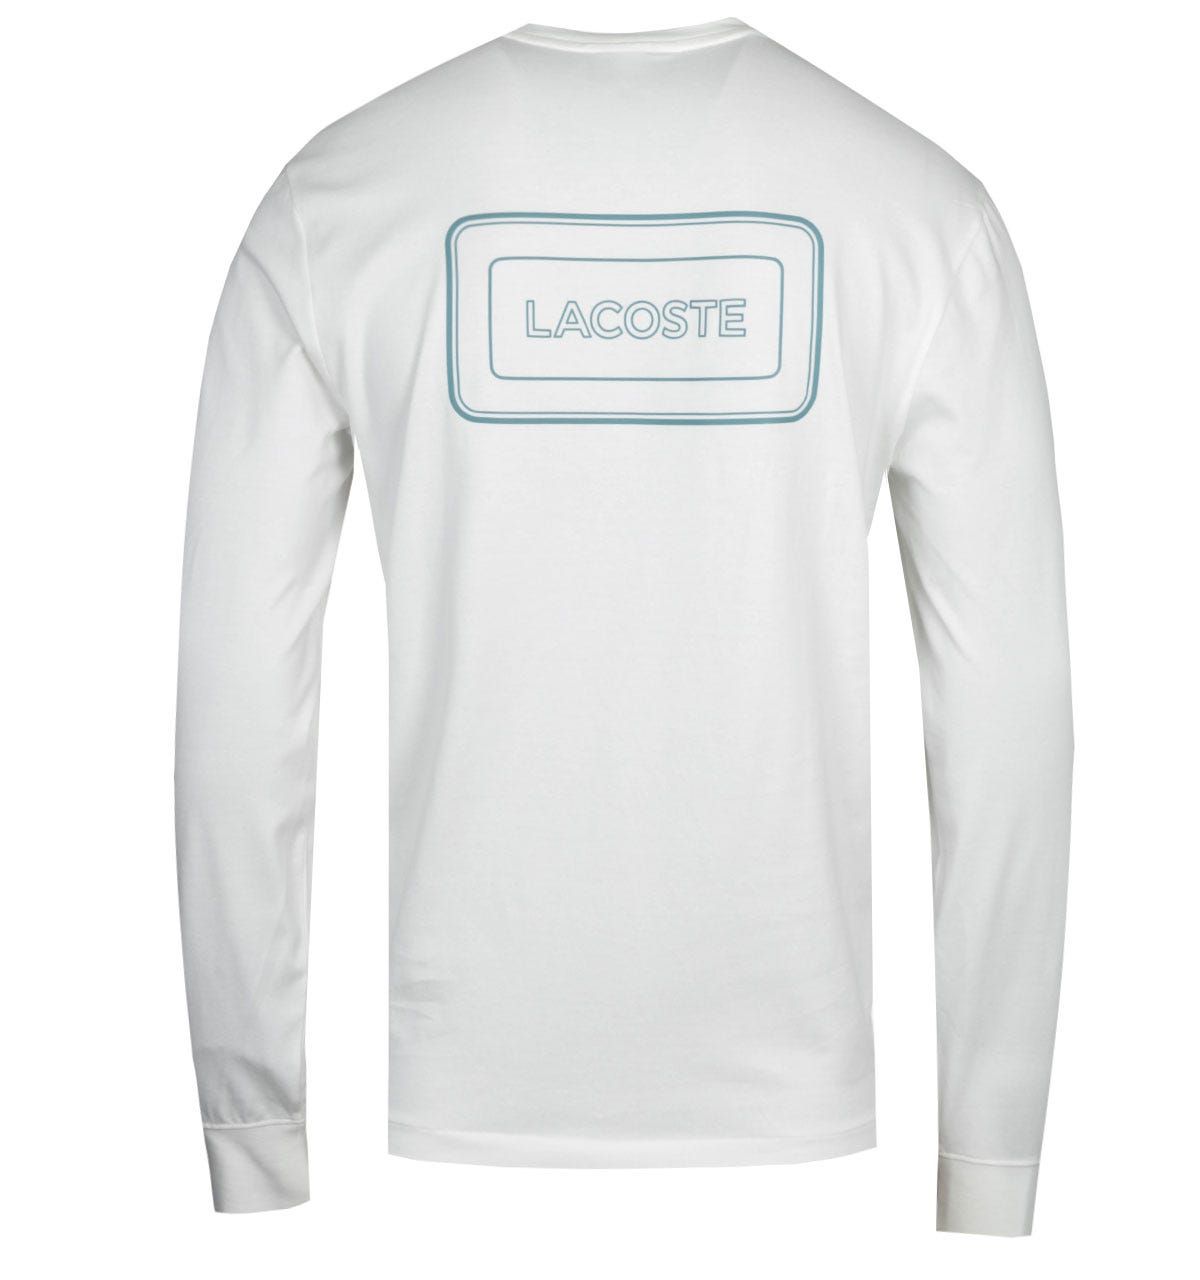 <p>A pure cotton composition, crafted by Lacoste. The Lacoste Homme White Long Sleeve T-Shirt is a lightweight garment, fitted with a crew neck and ribbed trims. This iconic design is finished with the Lacoste logo embroidered at the chest.</p><ul><li>Cotton composition</li><li>Crew neck</li><li>Long sleeve</li><li>Ribbed trims</li><li>Lacoste logo embroidered on chest</li></ul><p>Style & Fit:</p><ul><li>Regular fit</li><li>Fits true to size</li></ul><p>Fabric Composition & Care:</p><ul><li>100% Cotton</li><li>Machine washable</li></ul>